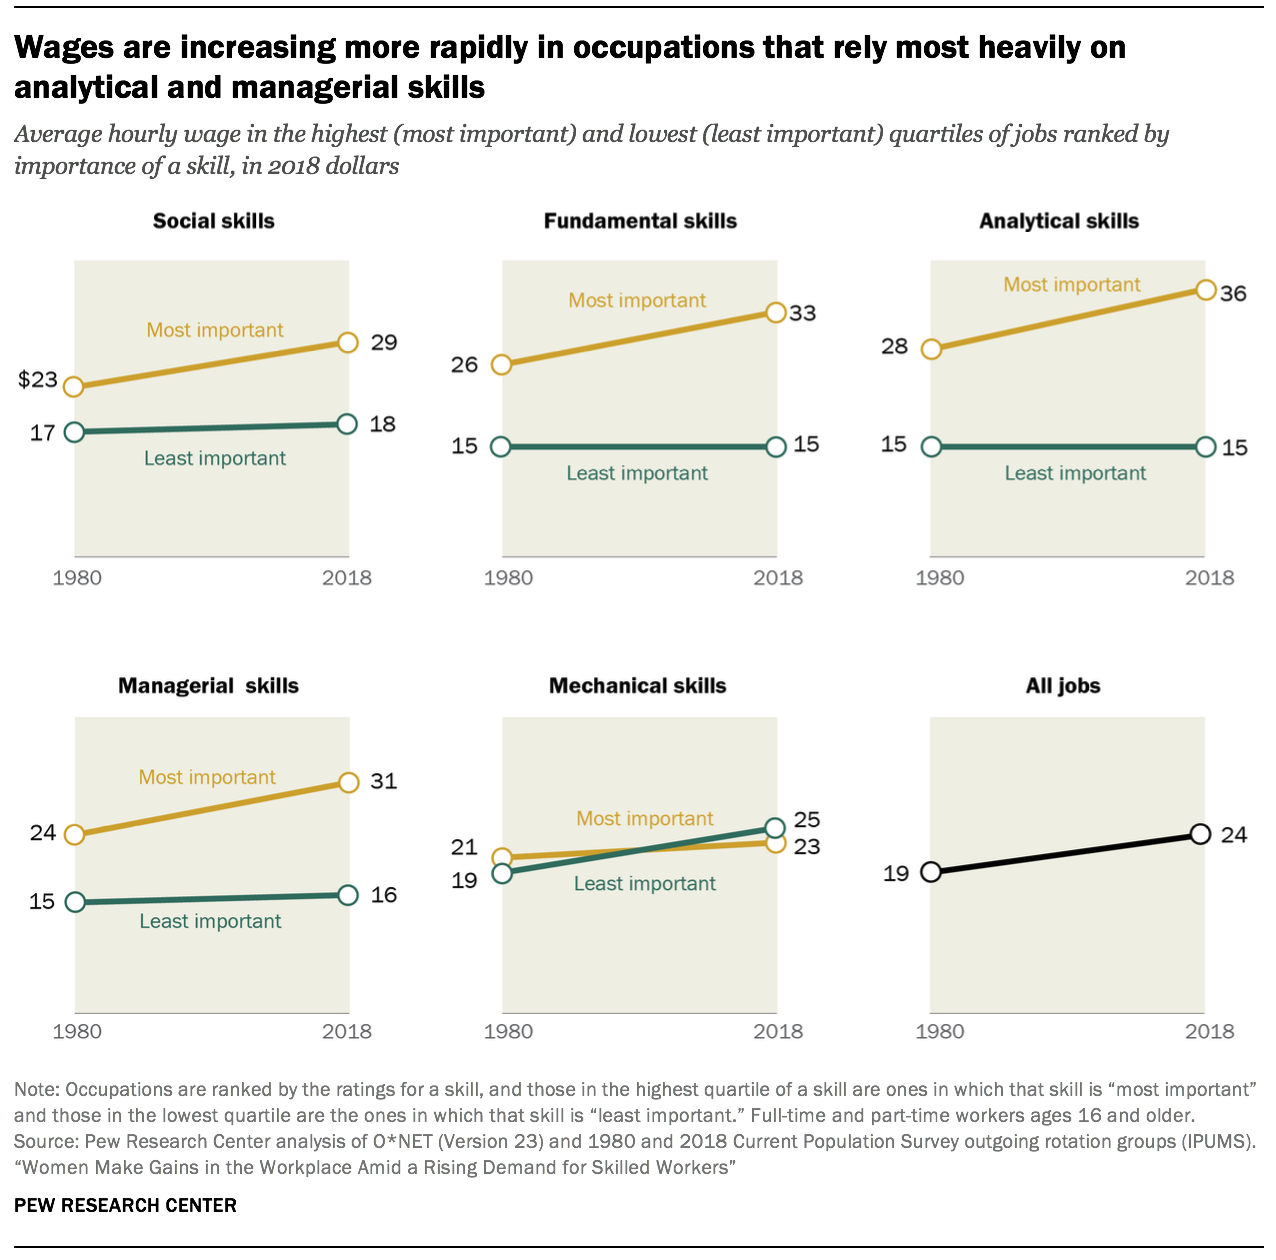 Wages are increasing more rapidly in occupations that rely most heavily on analytical and managerial skills